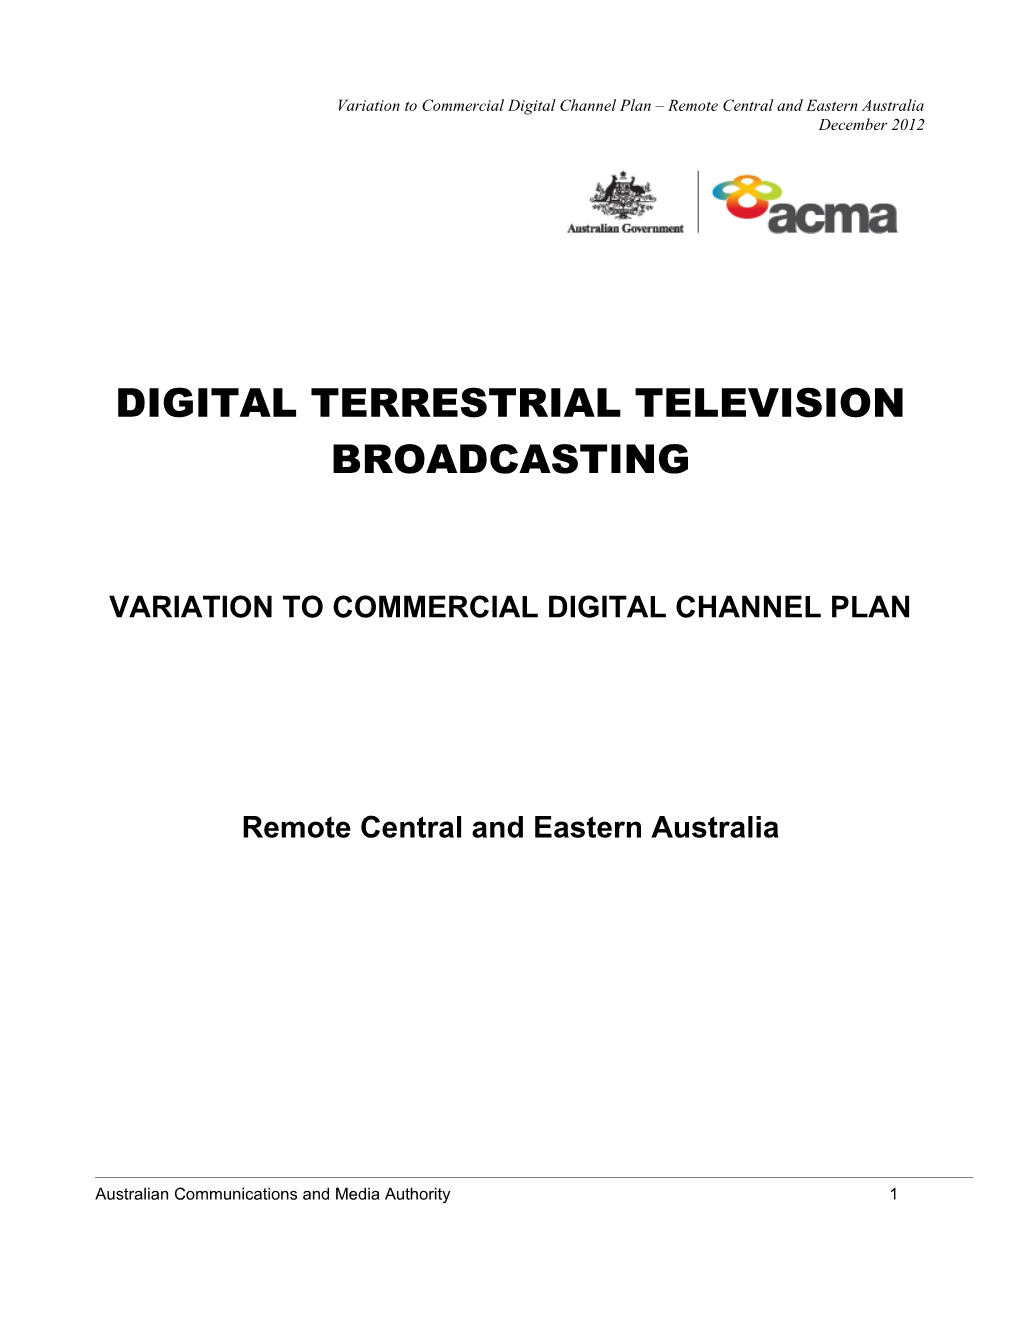 DTTB - Variation to Commercial Digital Channel Plan - Remote Central & Eastern Australia